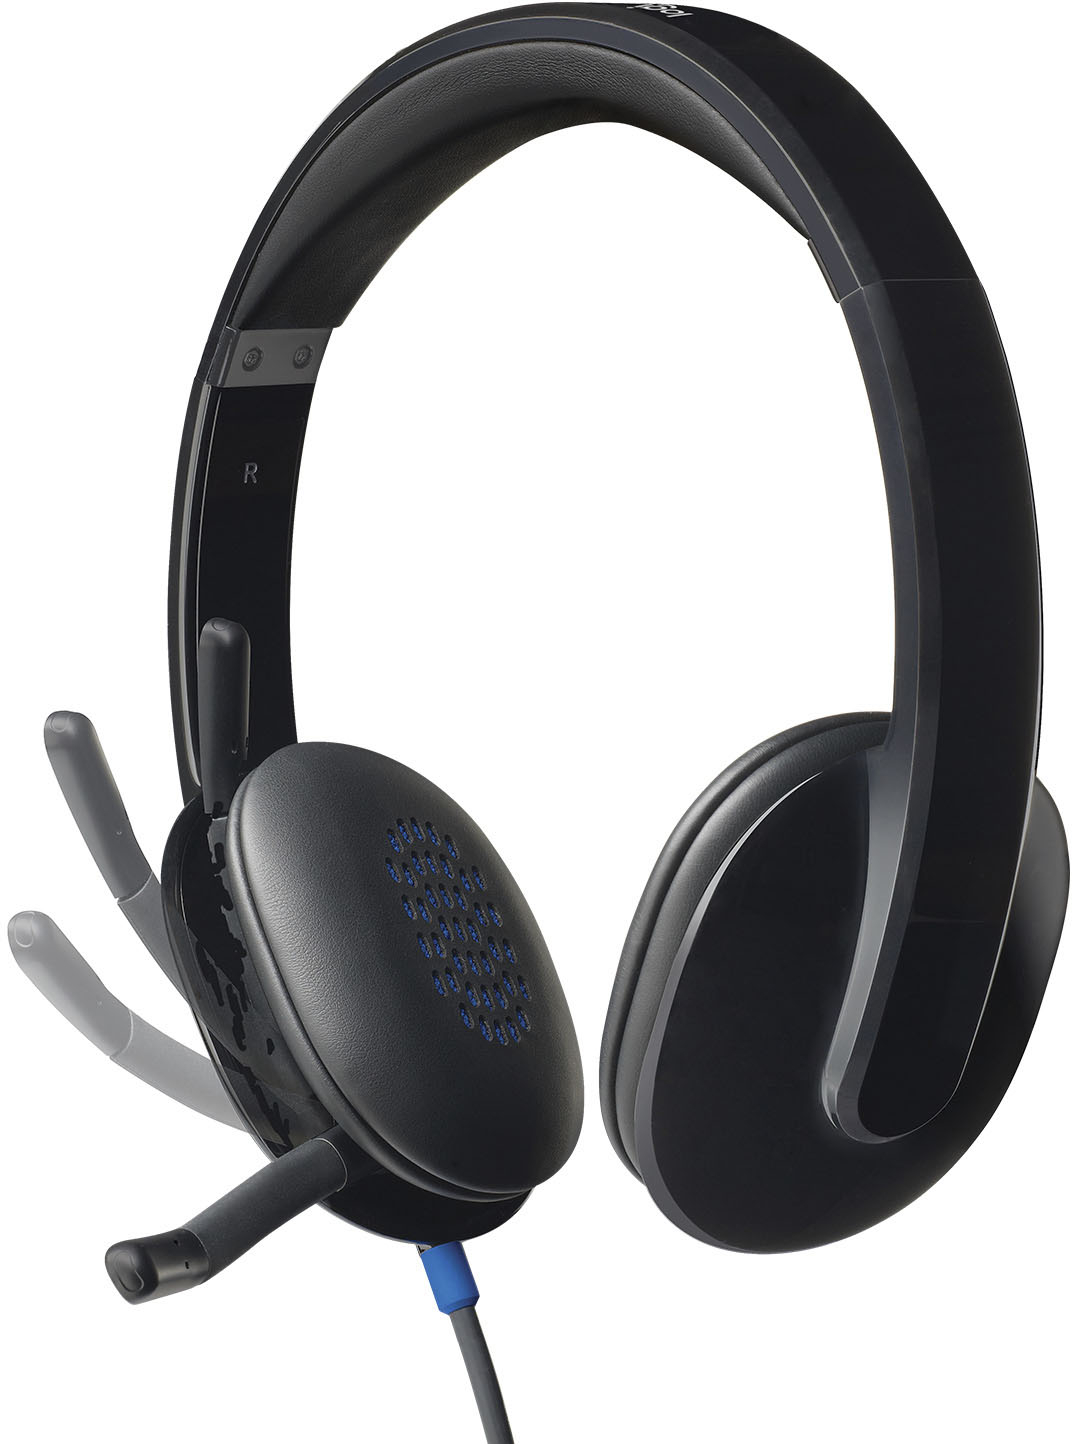 Angle View: Logitech - H540 Wired On-Ear Headset - Black